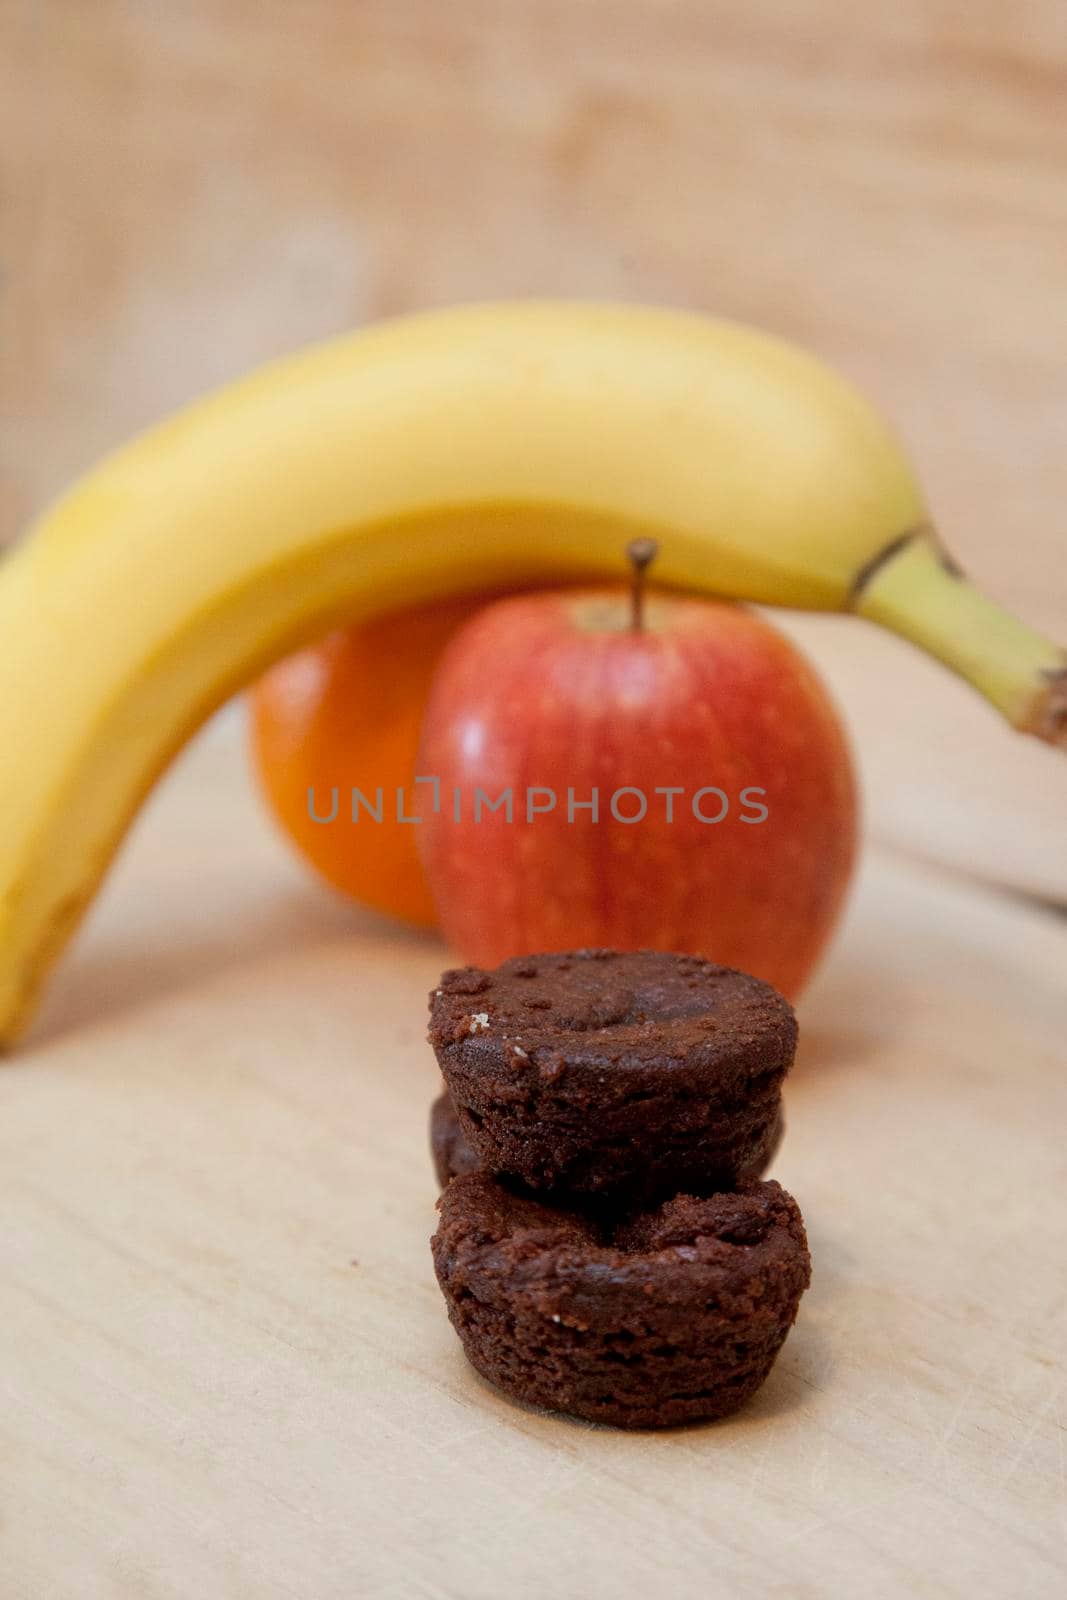 Making the choice between a stack of small brownies or some delicious whole fruit 